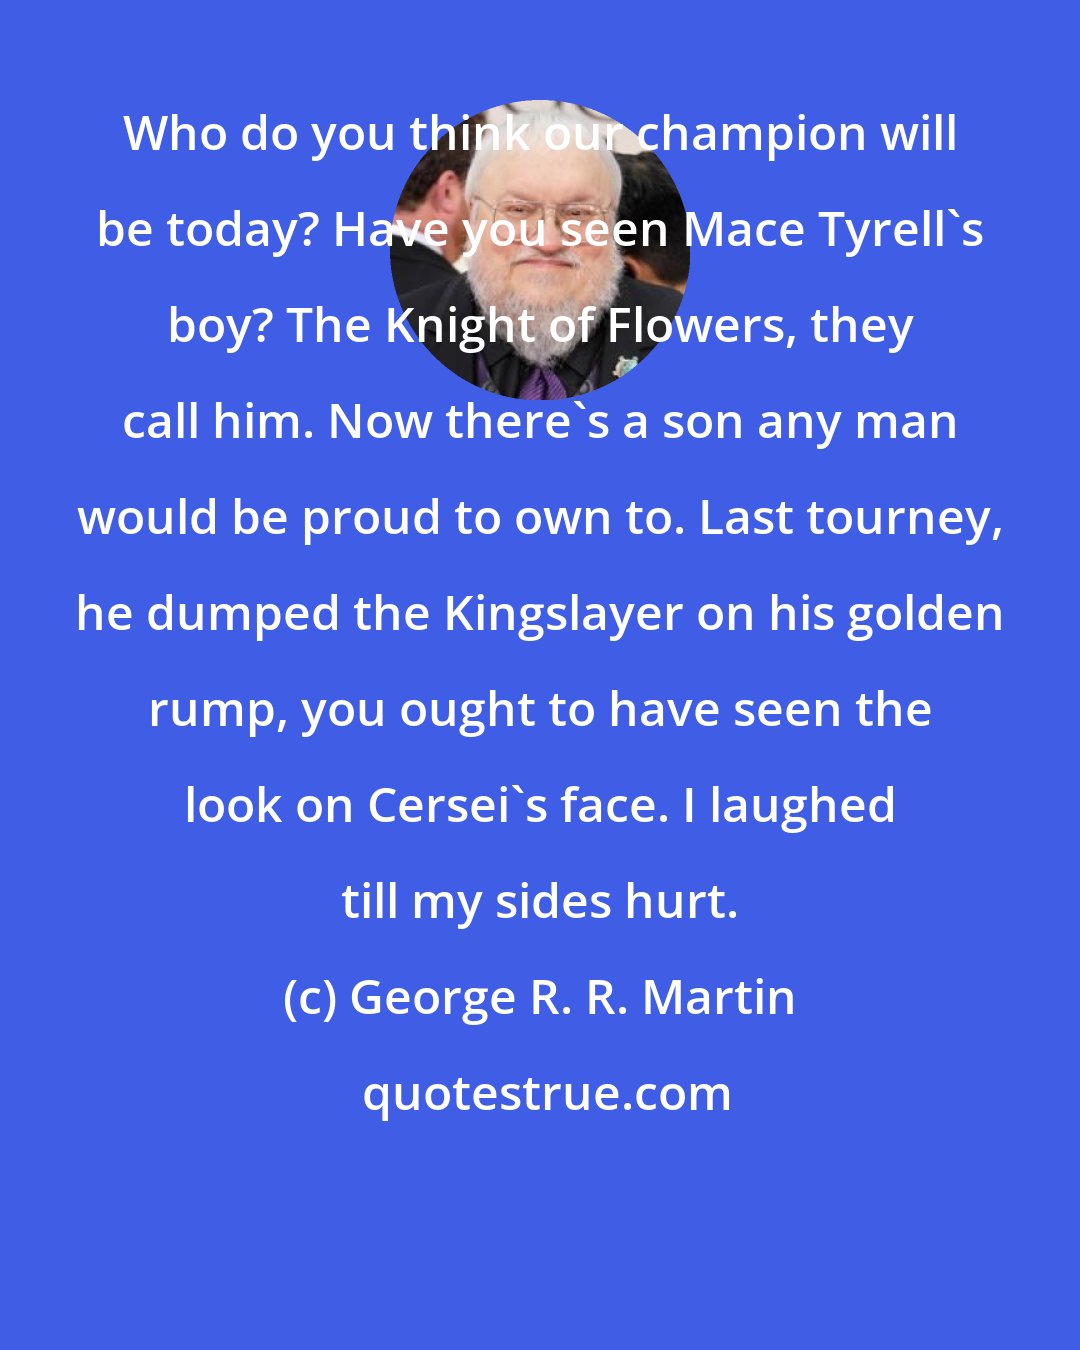 George R. R. Martin: Who do you think our champion will be today? Have you seen Mace Tyrell's boy? The Knight of Flowers, they call him. Now there's a son any man would be proud to own to. Last tourney, he dumped the Kingslayer on his golden rump, you ought to have seen the look on Cersei's face. I laughed till my sides hurt.